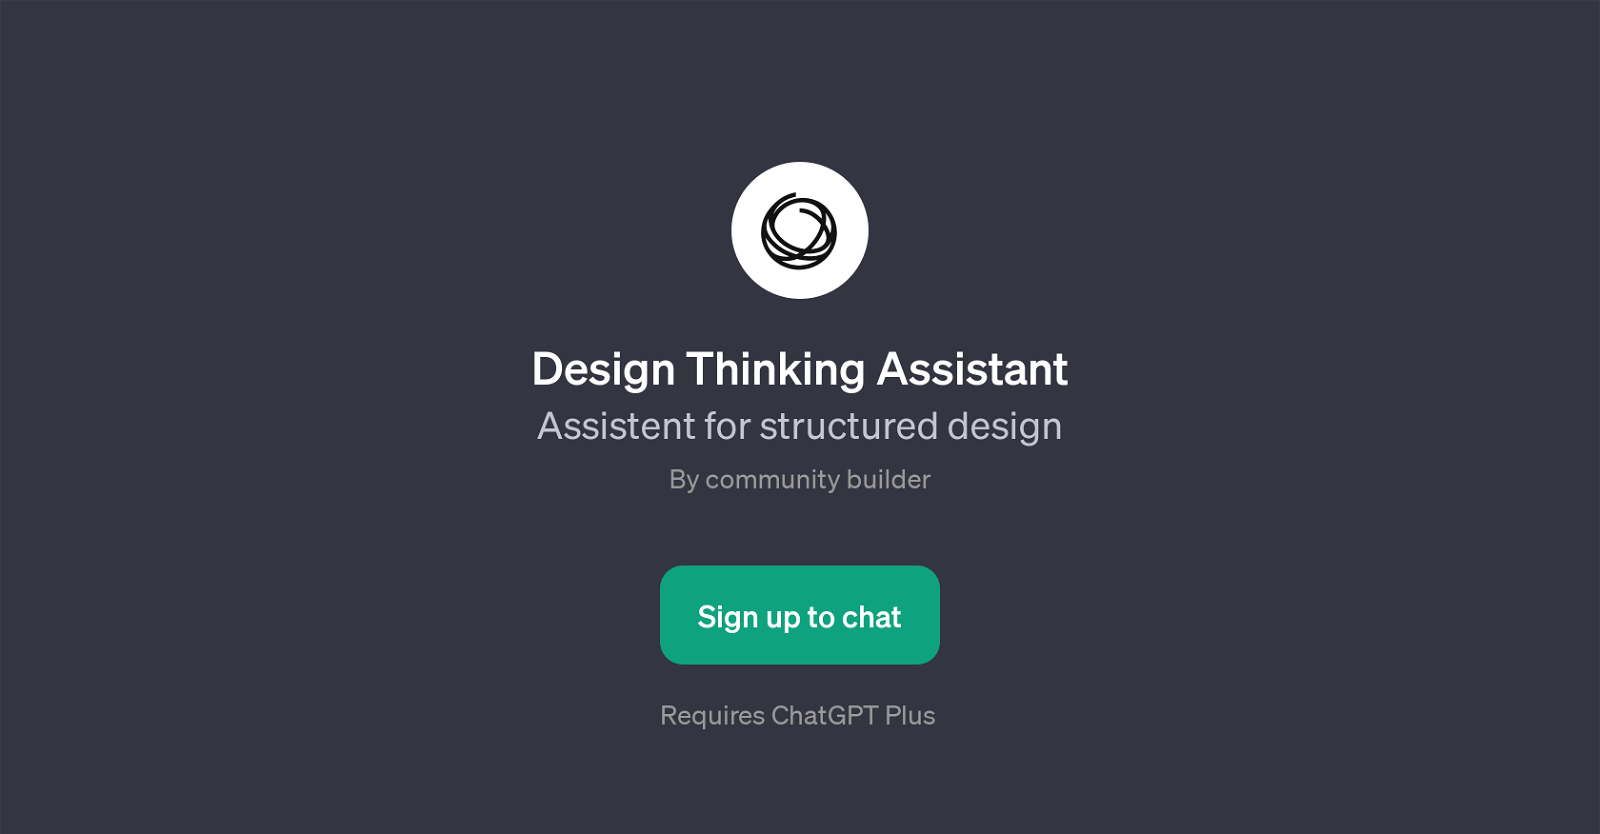 Design Thinking Assistant website